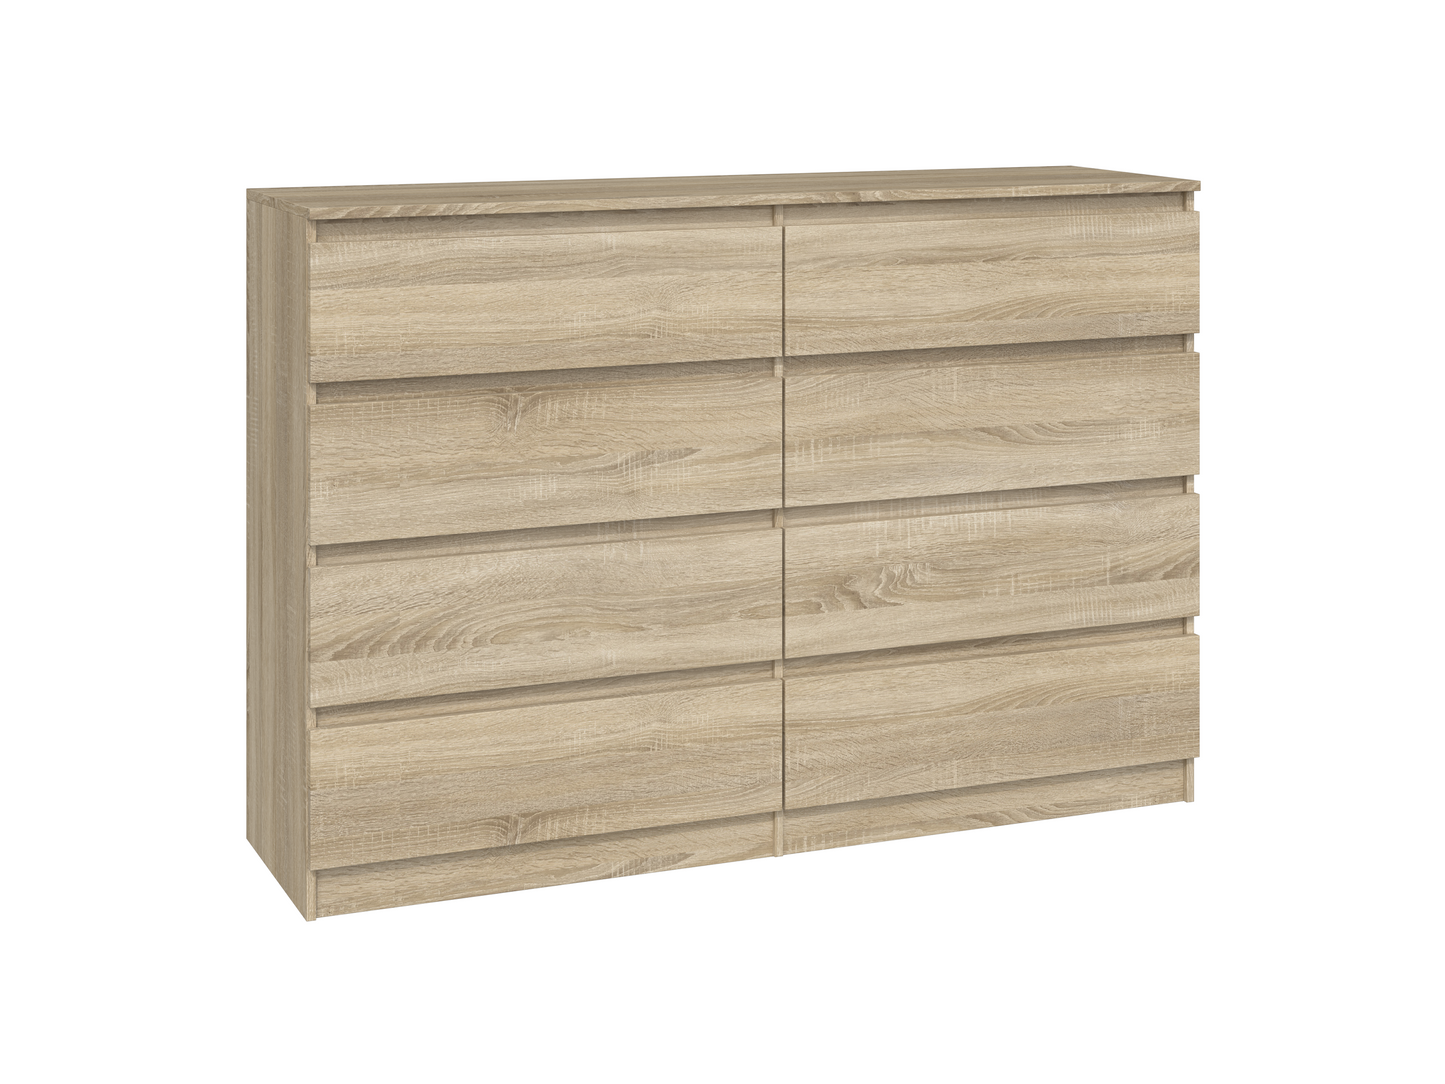 M8 140 Large Malwa Chest of Drawers